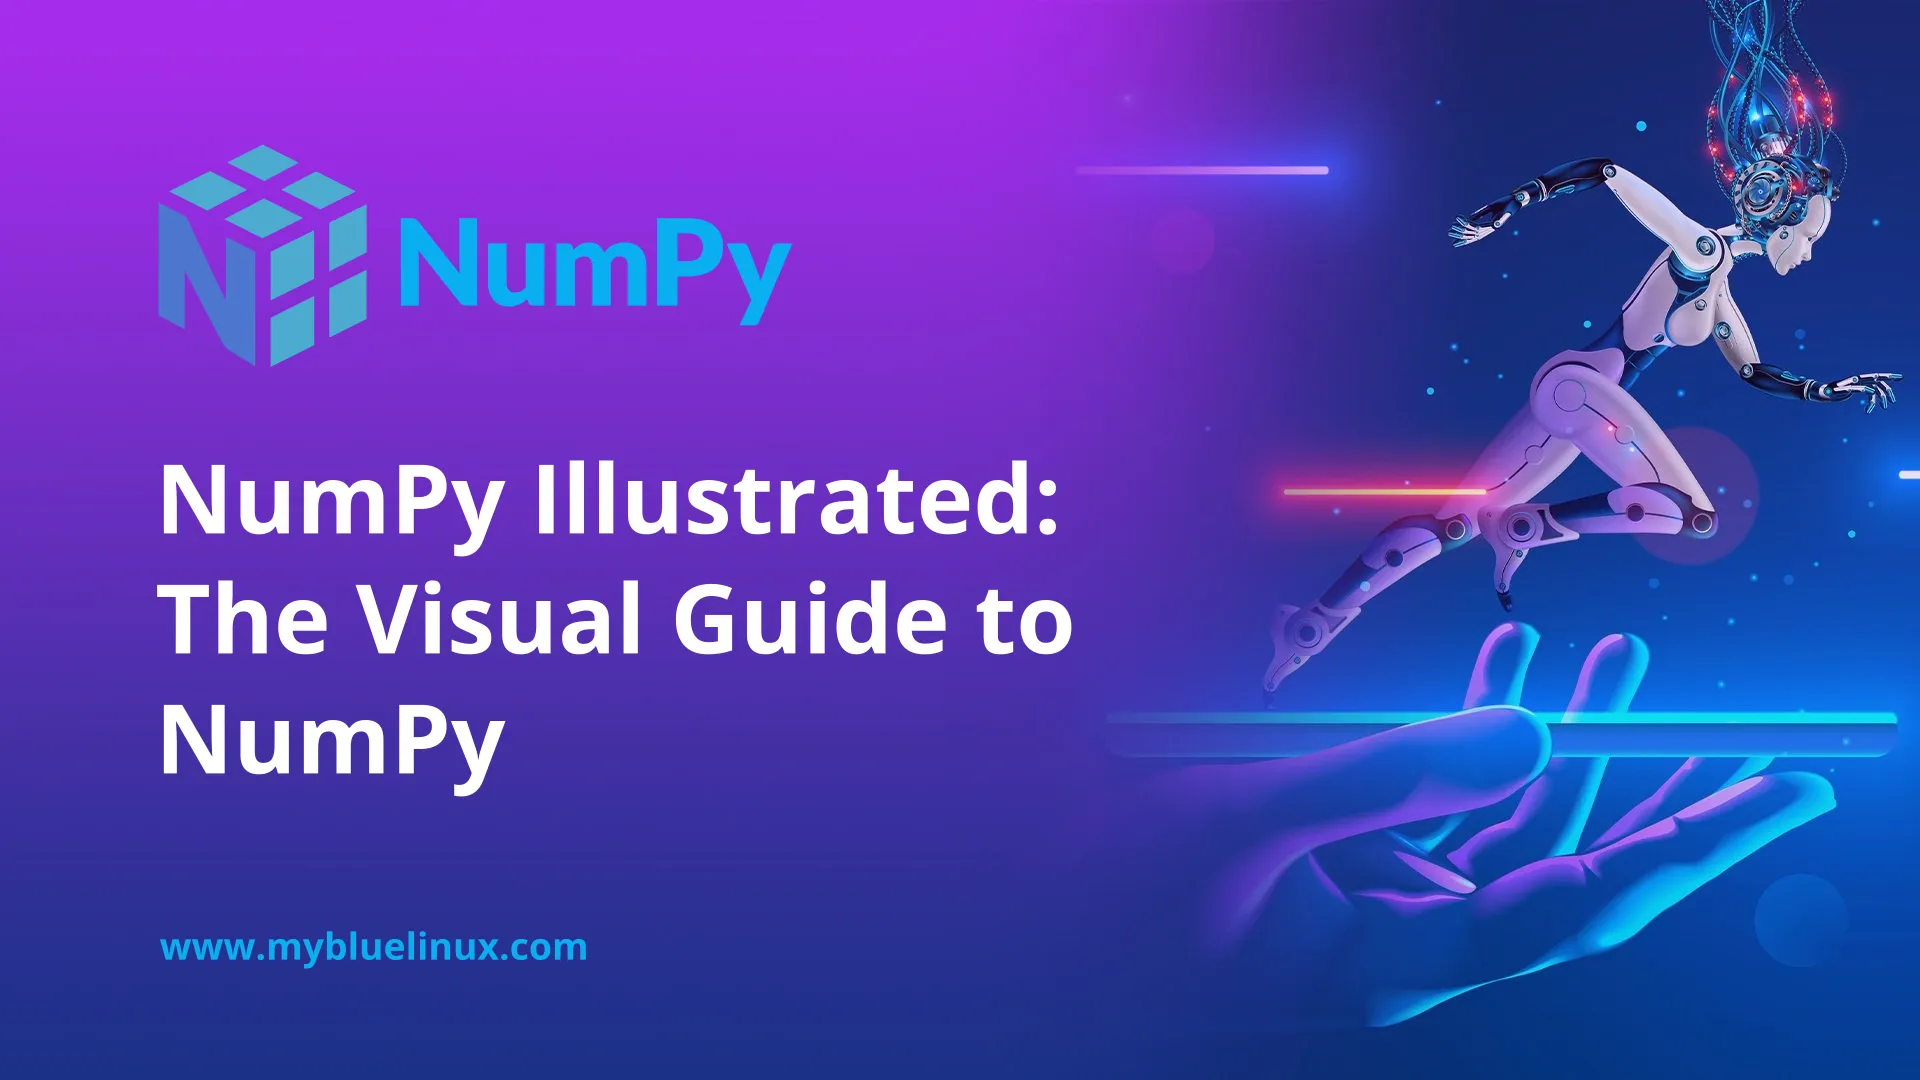 NumPy Illustrated: The Visual Guide to NumPy